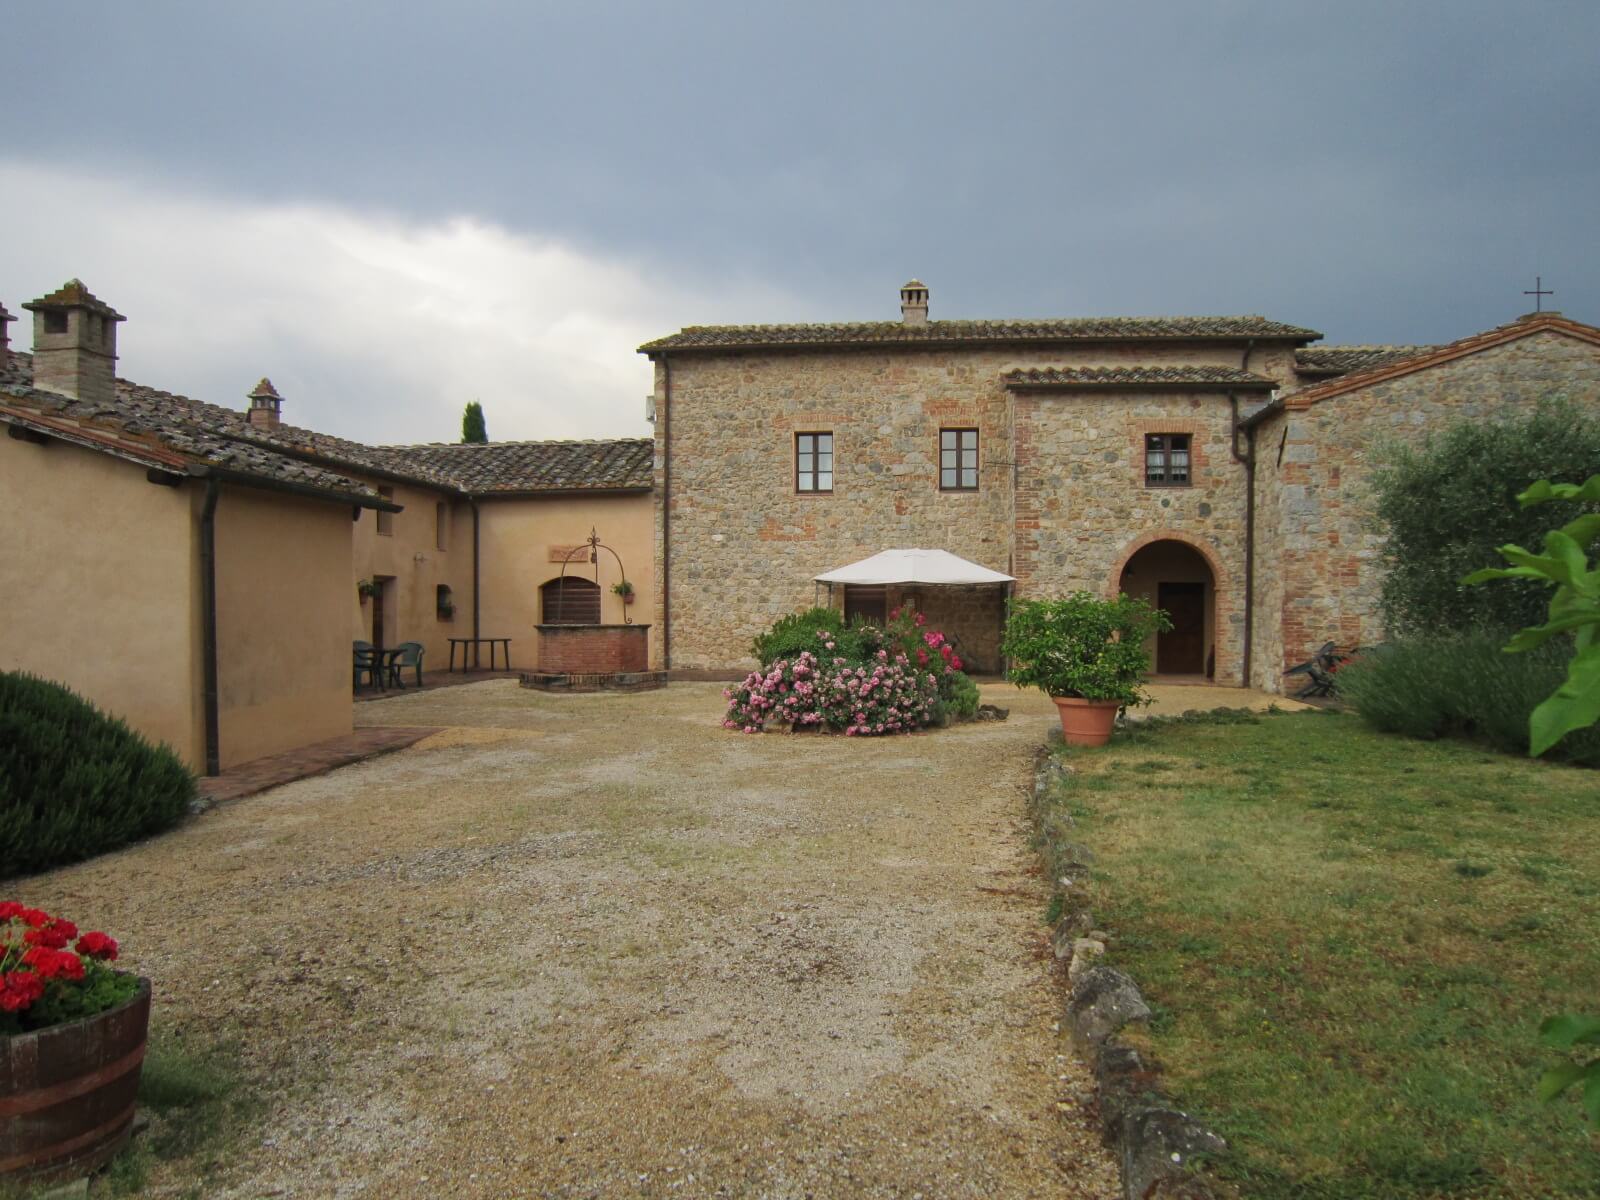 Tuscany: Is It Still A Property Investor’s Dream?